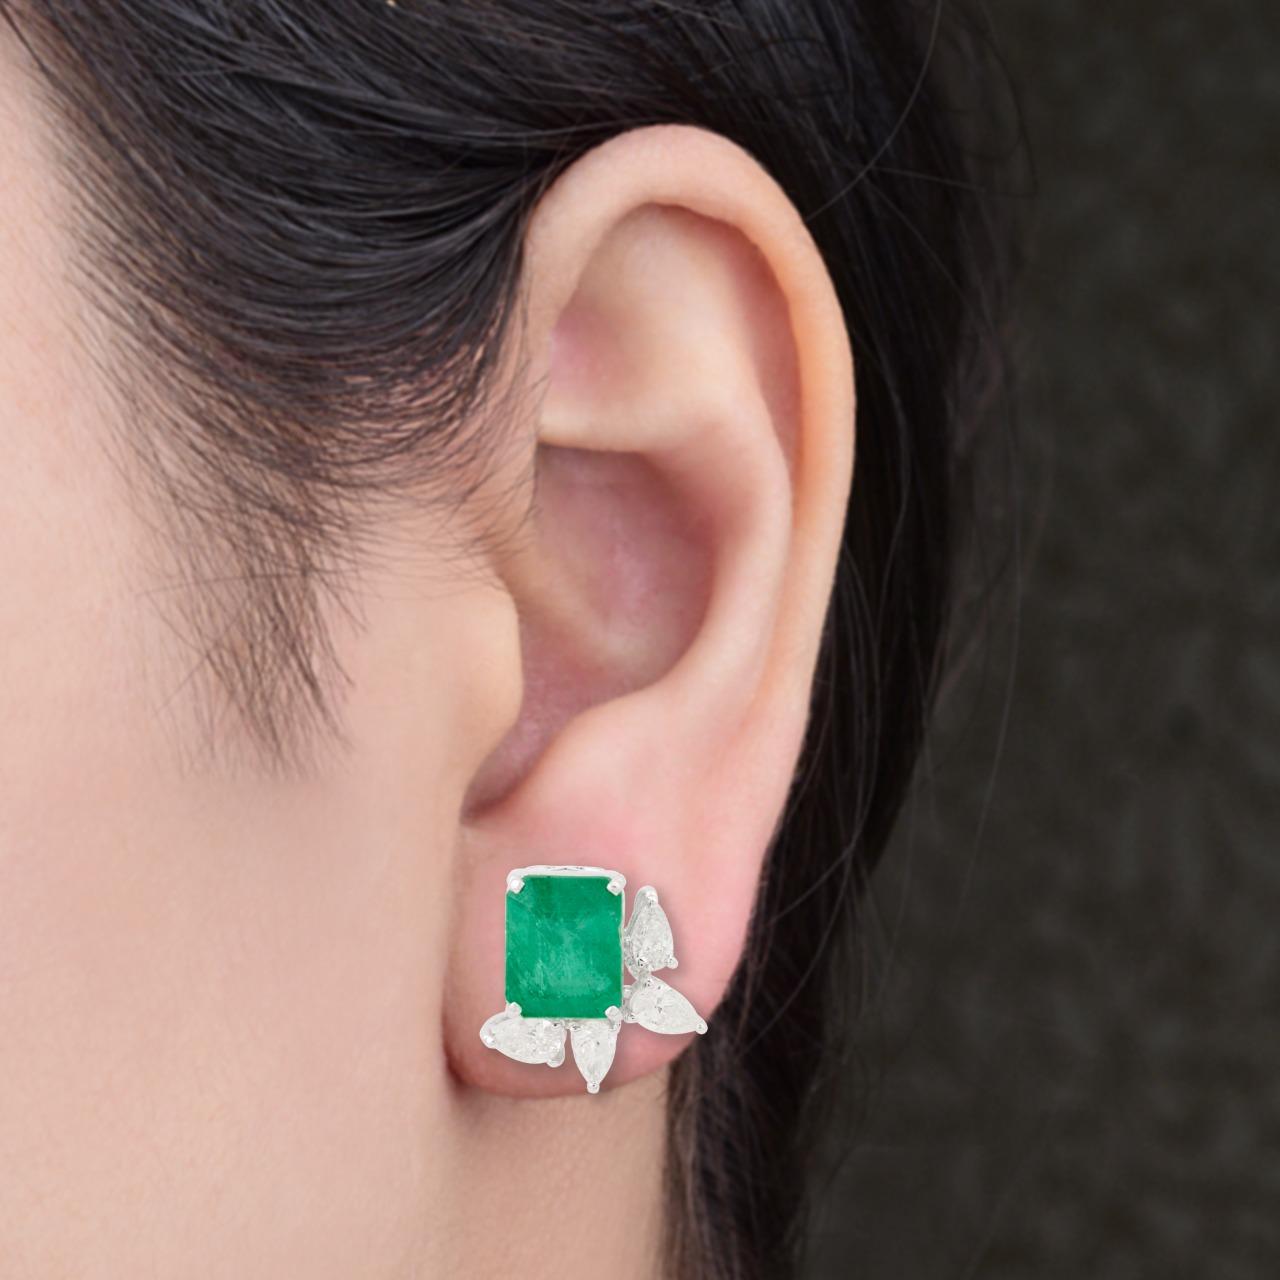 Cast in 14 karat gold, these stunning earrings are hand set with 4.80 carats emerald and 1.50 carats of glimmering diamonds. 

FOLLOW MEGHNA JEWELS storefront to view the latest collection & exclusive pieces. Meghna Jewels is proudly rated as a Top